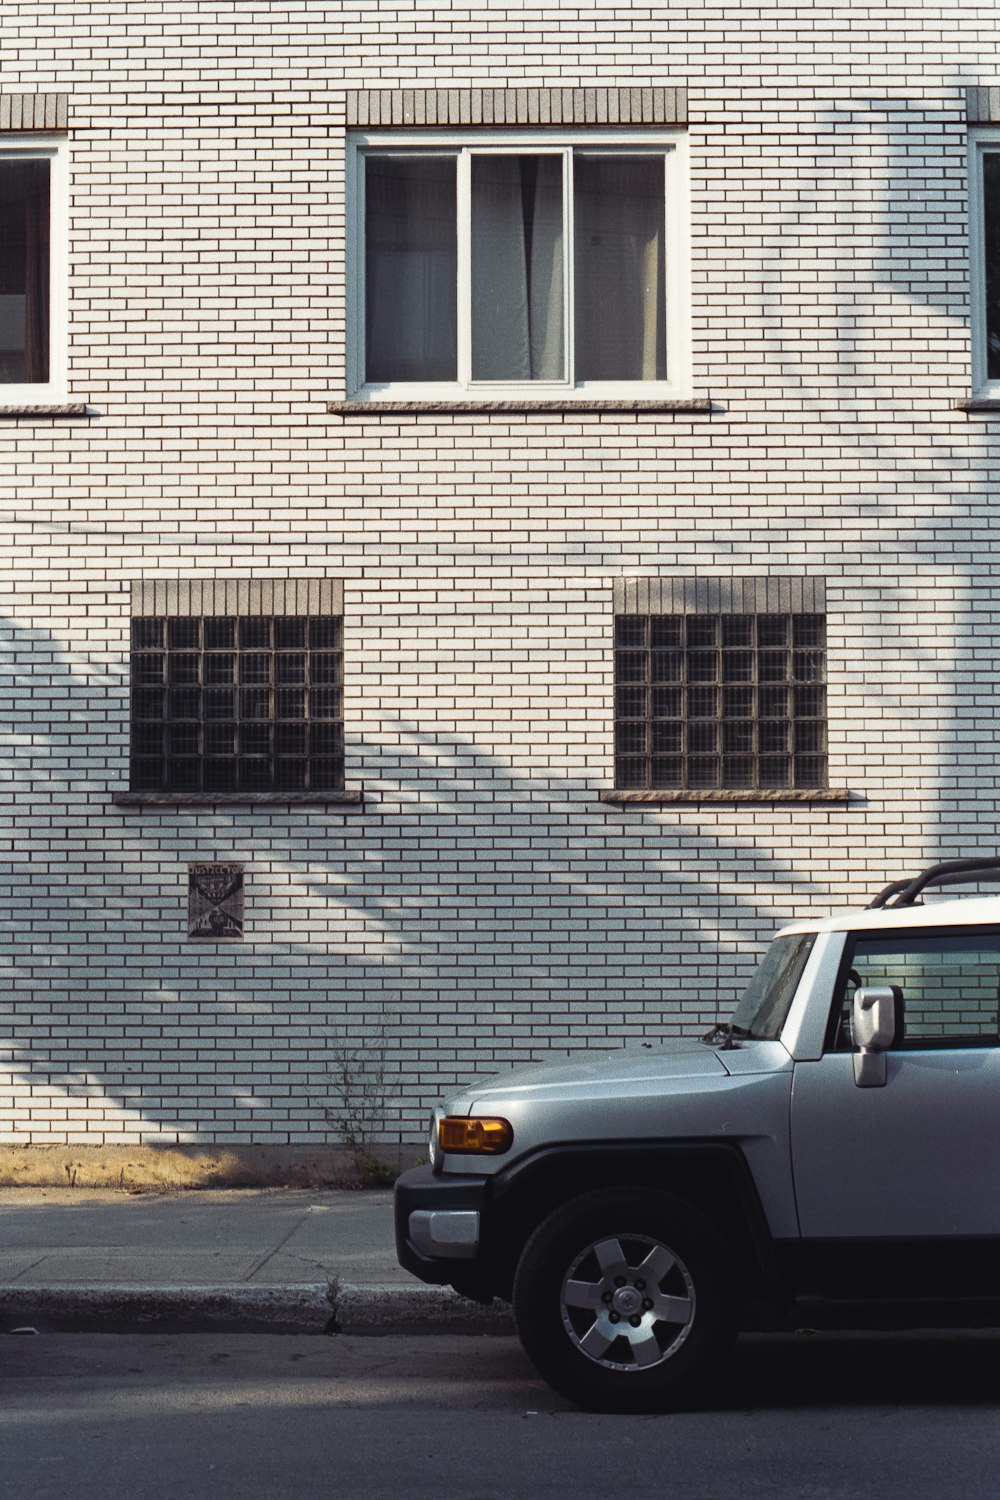 gray car parked beside brown brick building